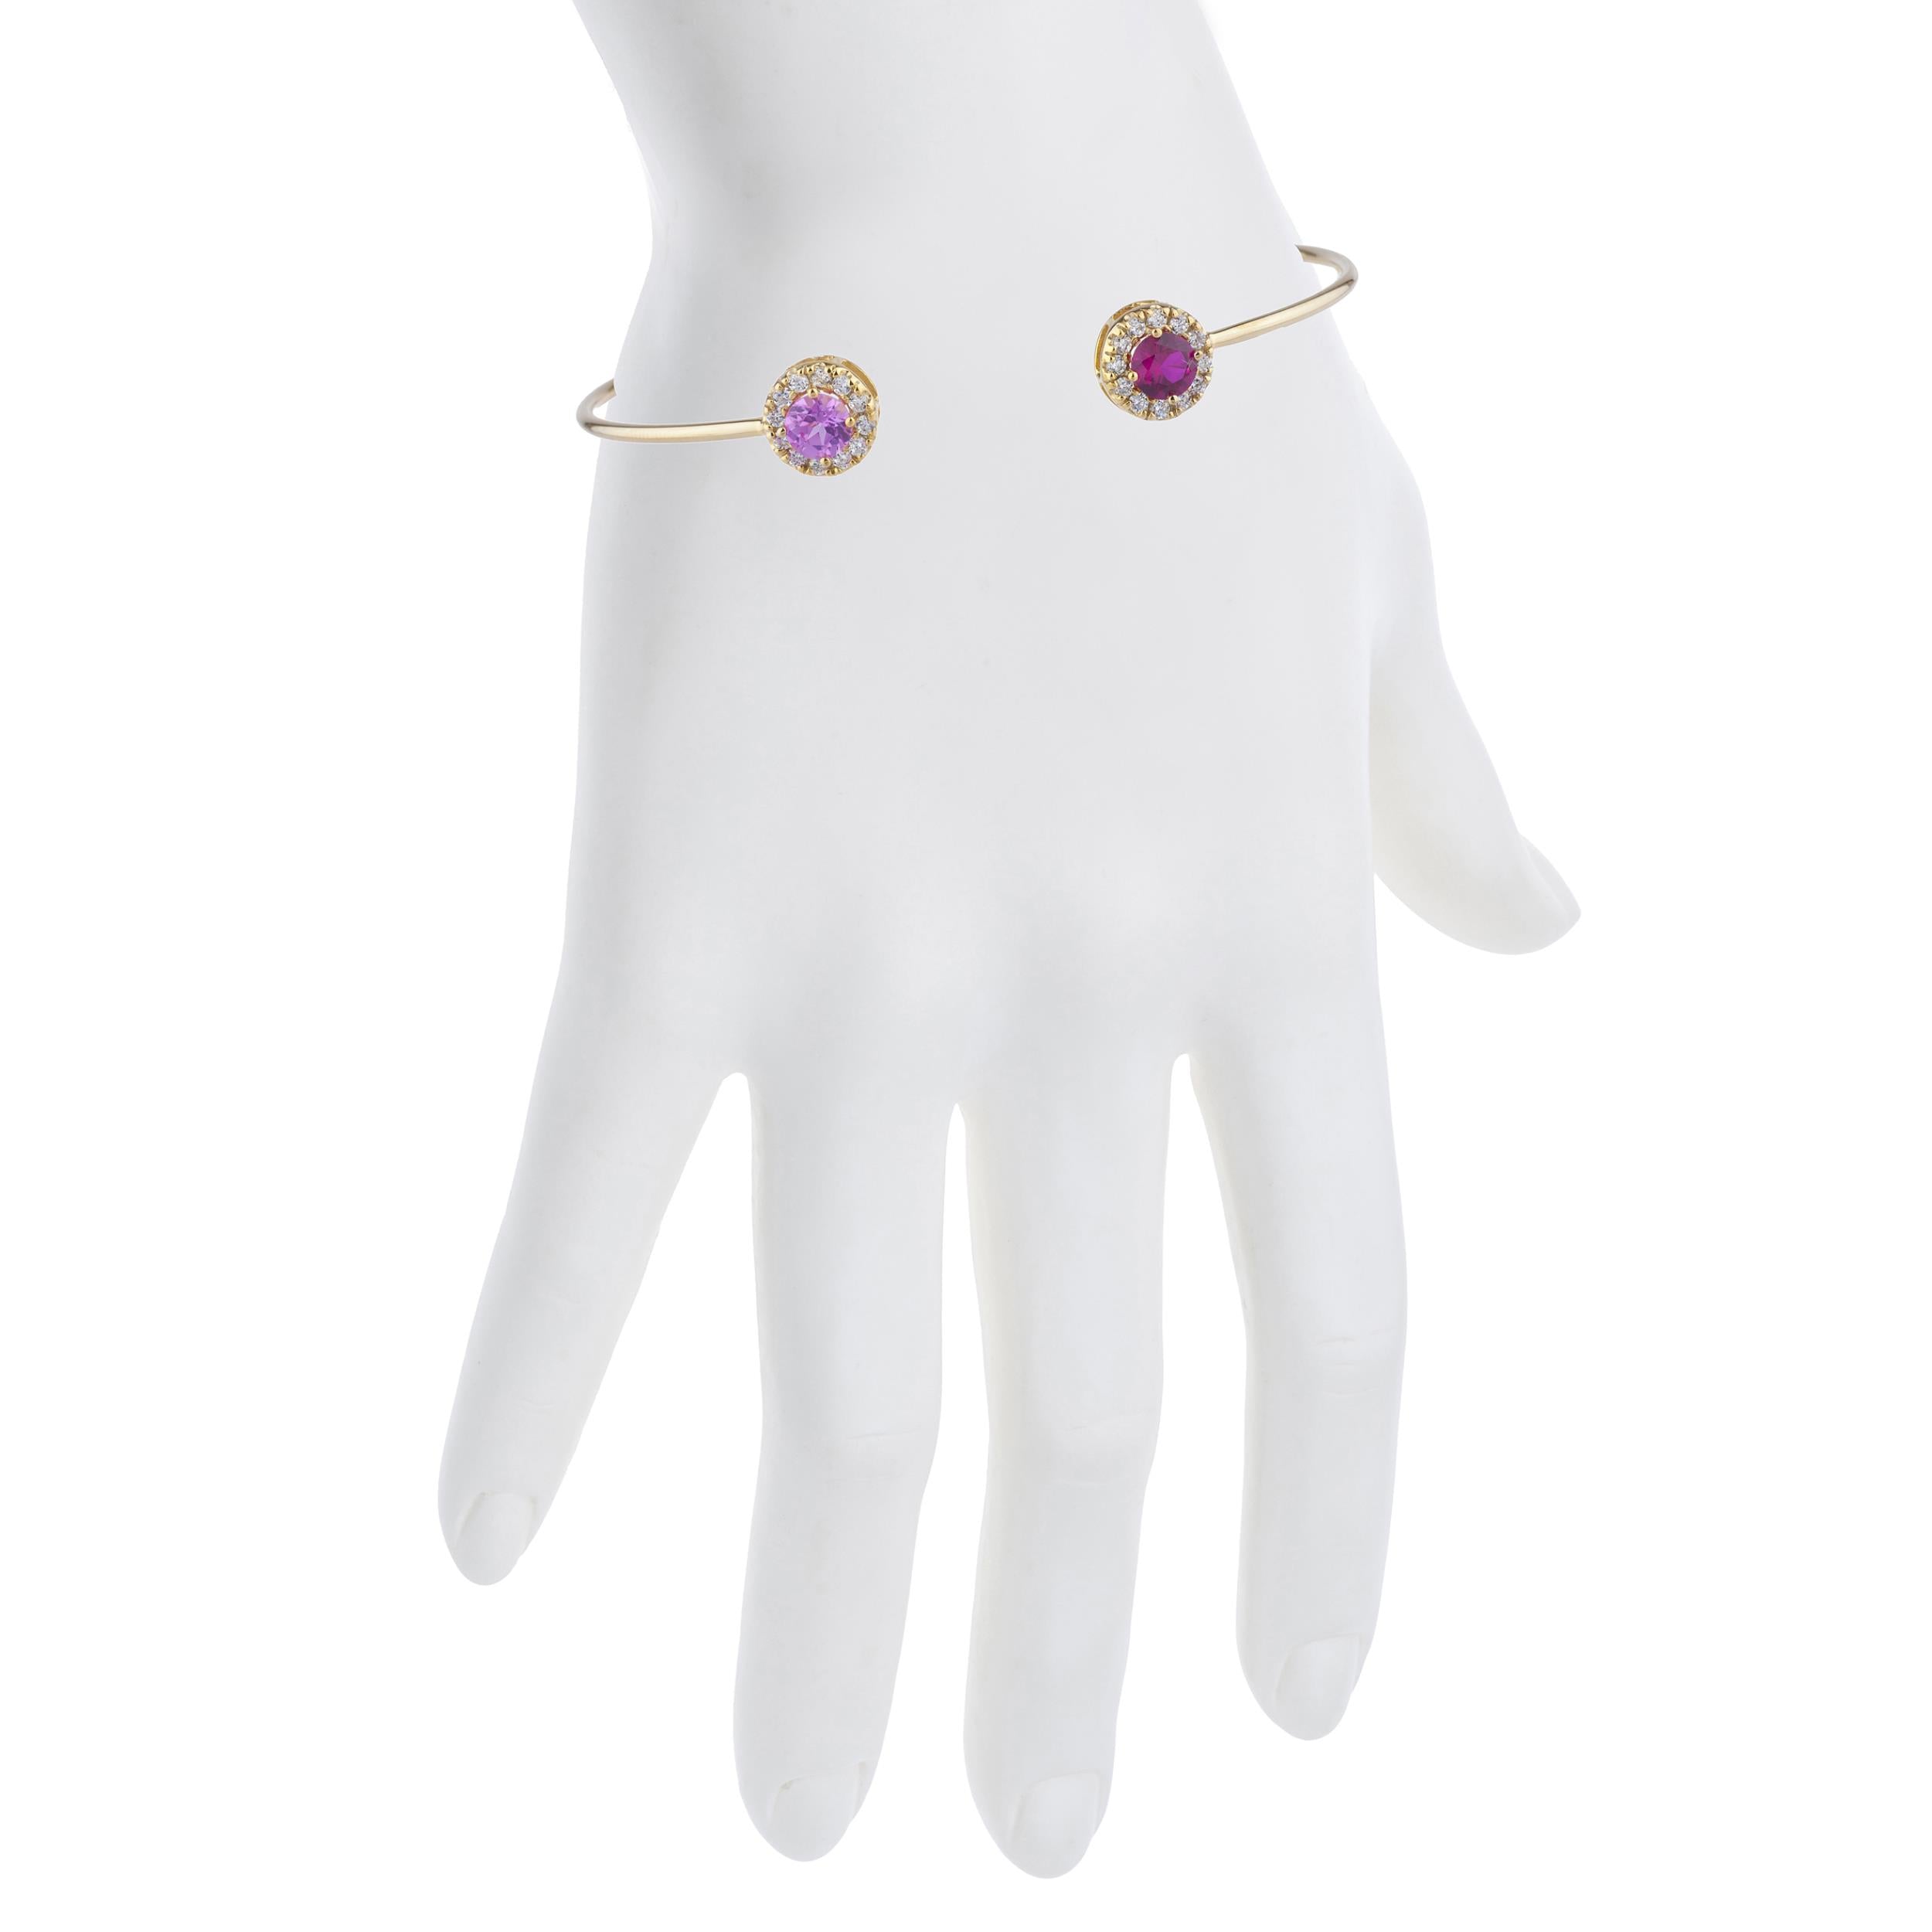 1 Ct Pink Sapphire & Ruby Halo Design Round Bangle Bracelet 14Kt Yellow Gold Rose Gold Silver